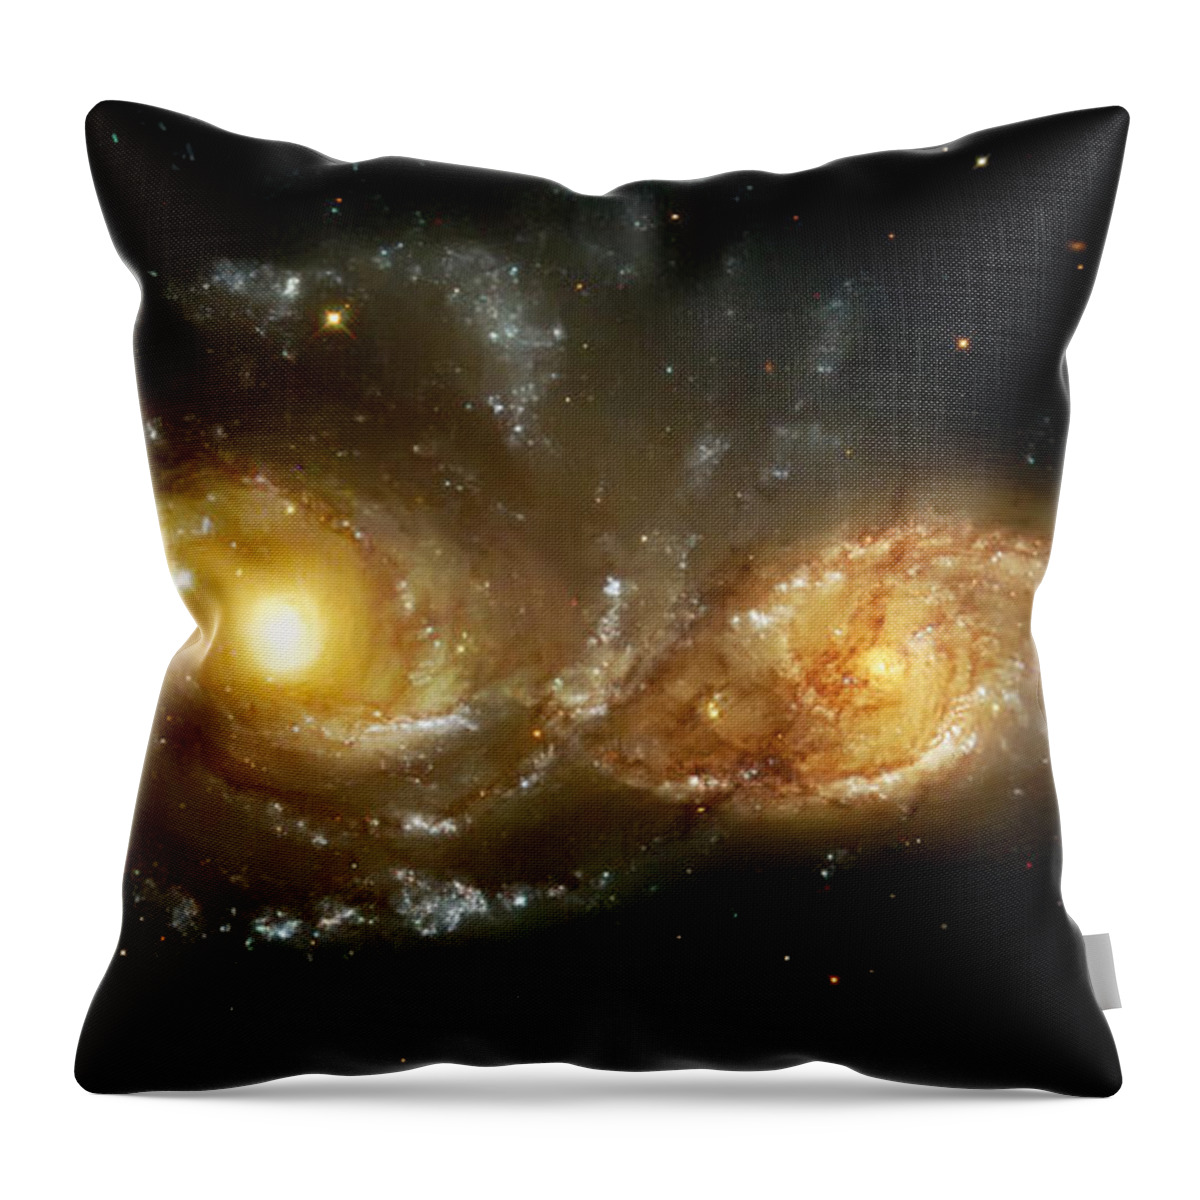 Nebula Throw Pillow featuring the photograph Two Spiral Galaxies by Jennifer Rondinelli Reilly - Fine Art Photography